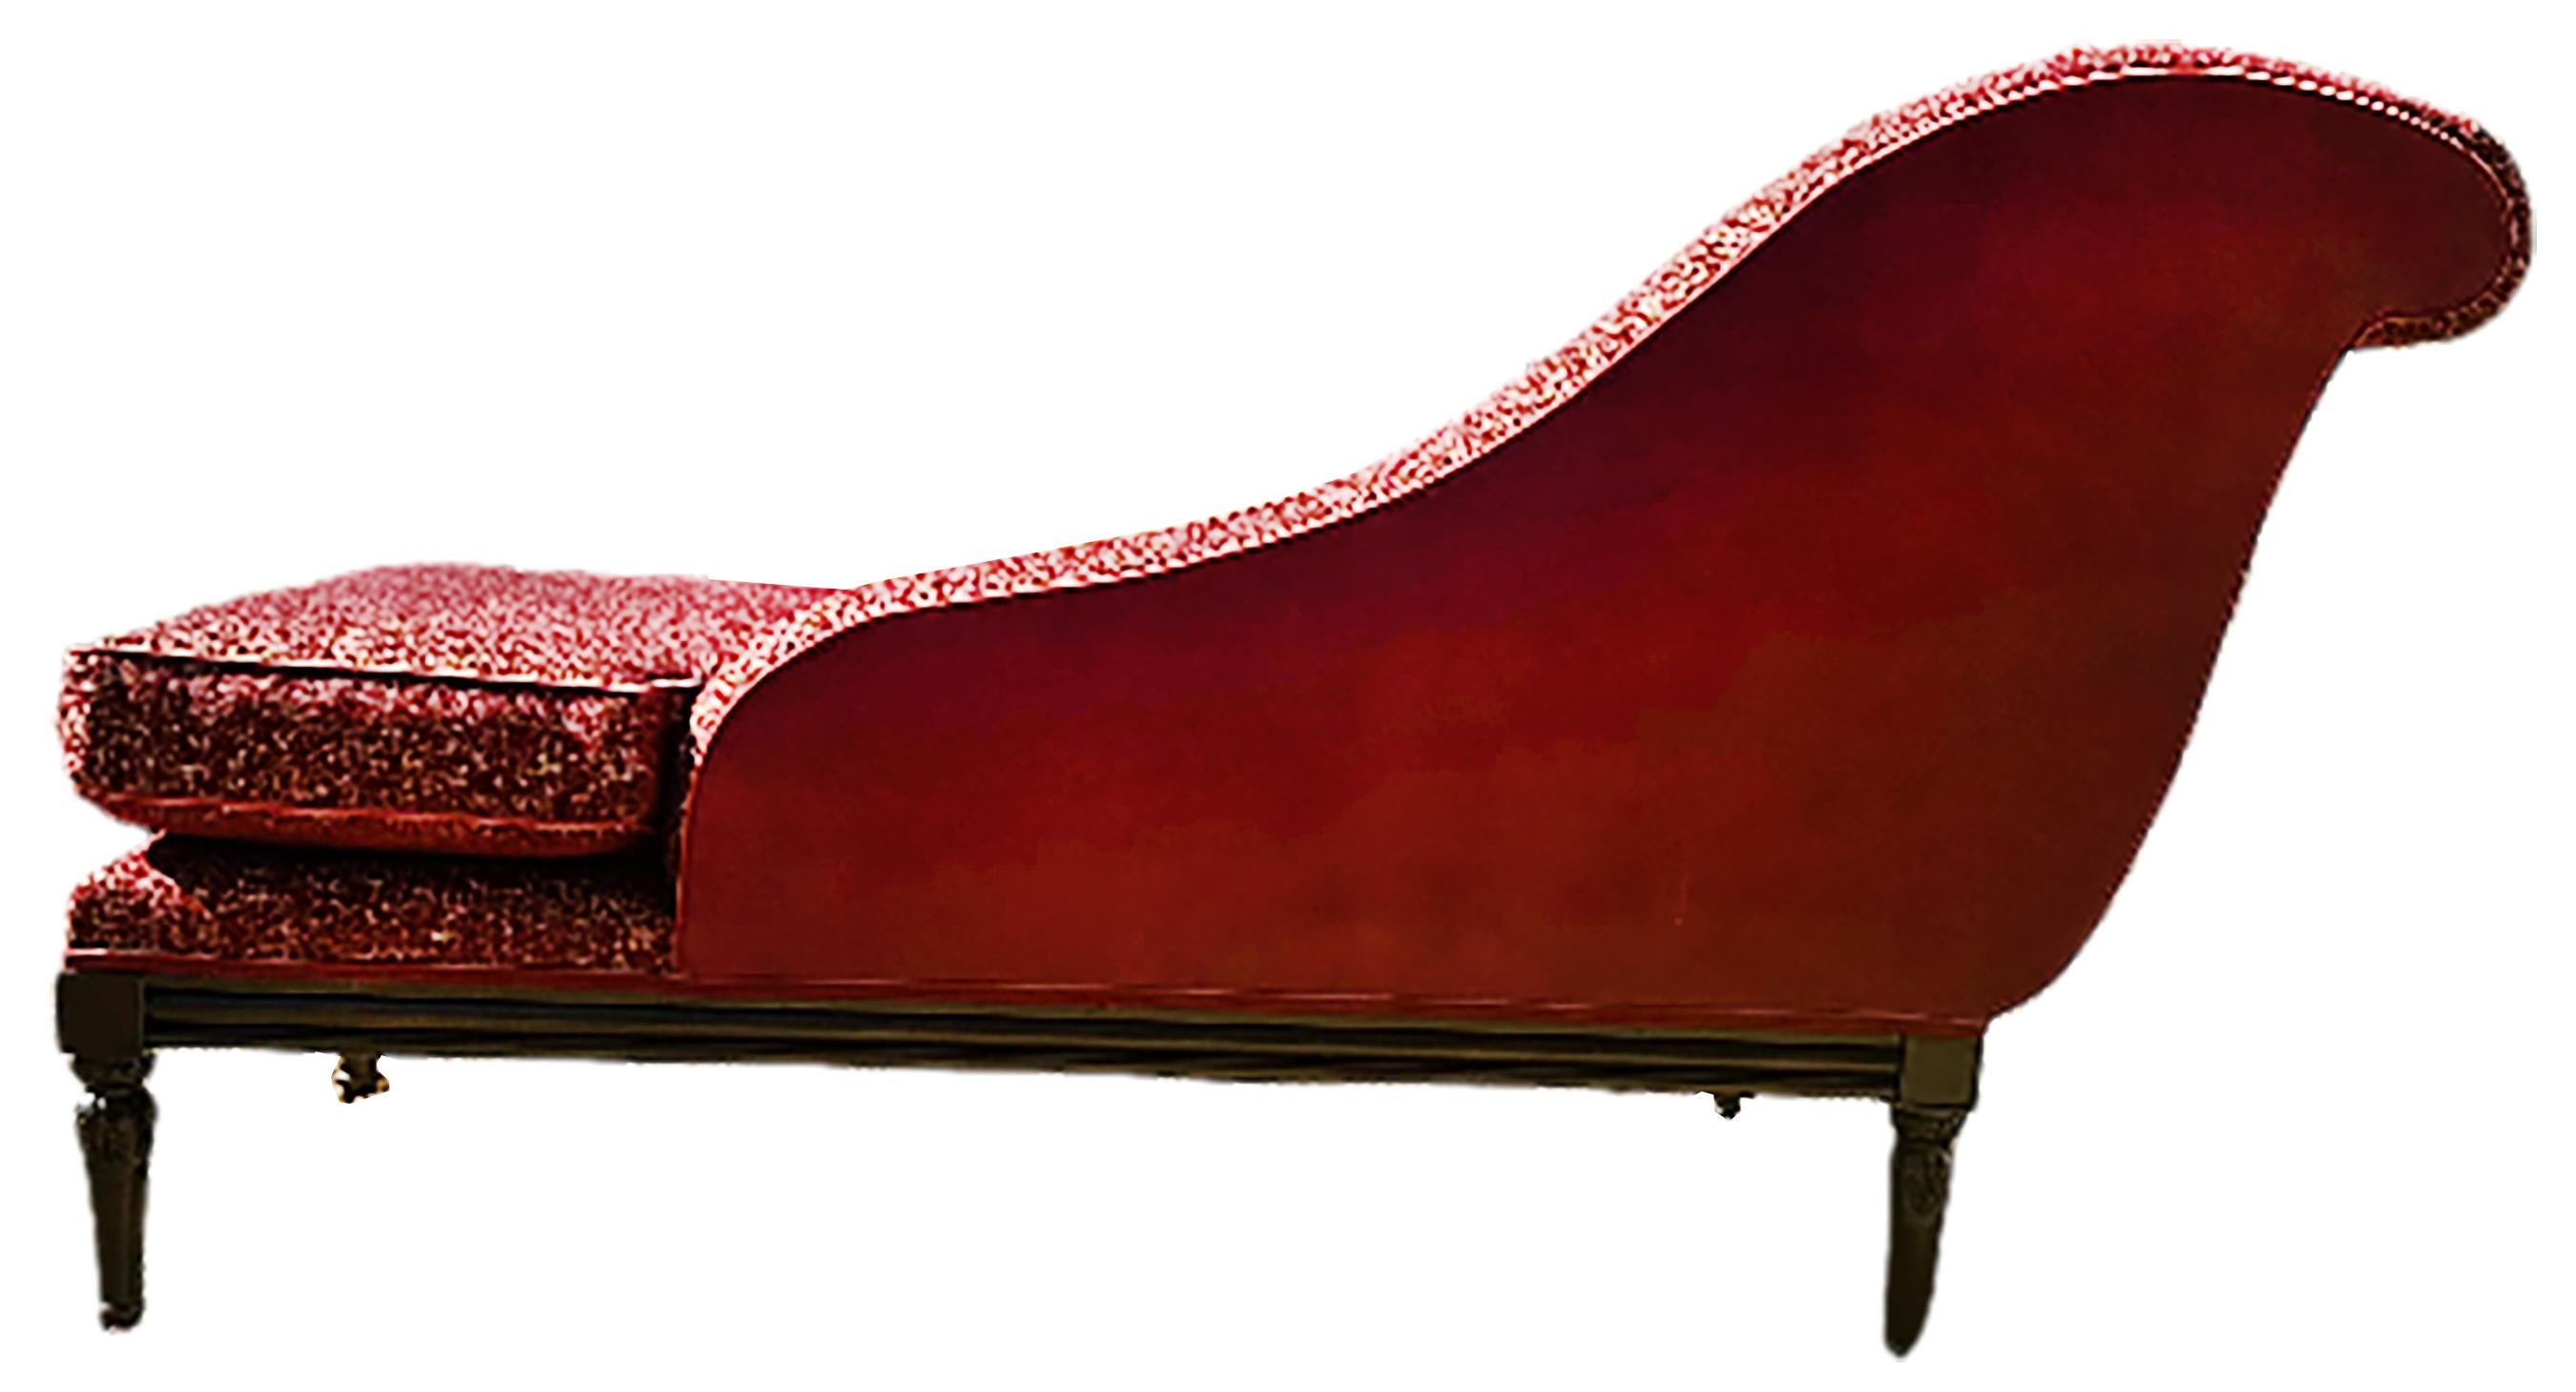 Antique Chaise Longue with Garment-colored Fabric Upholstery For Sale 2